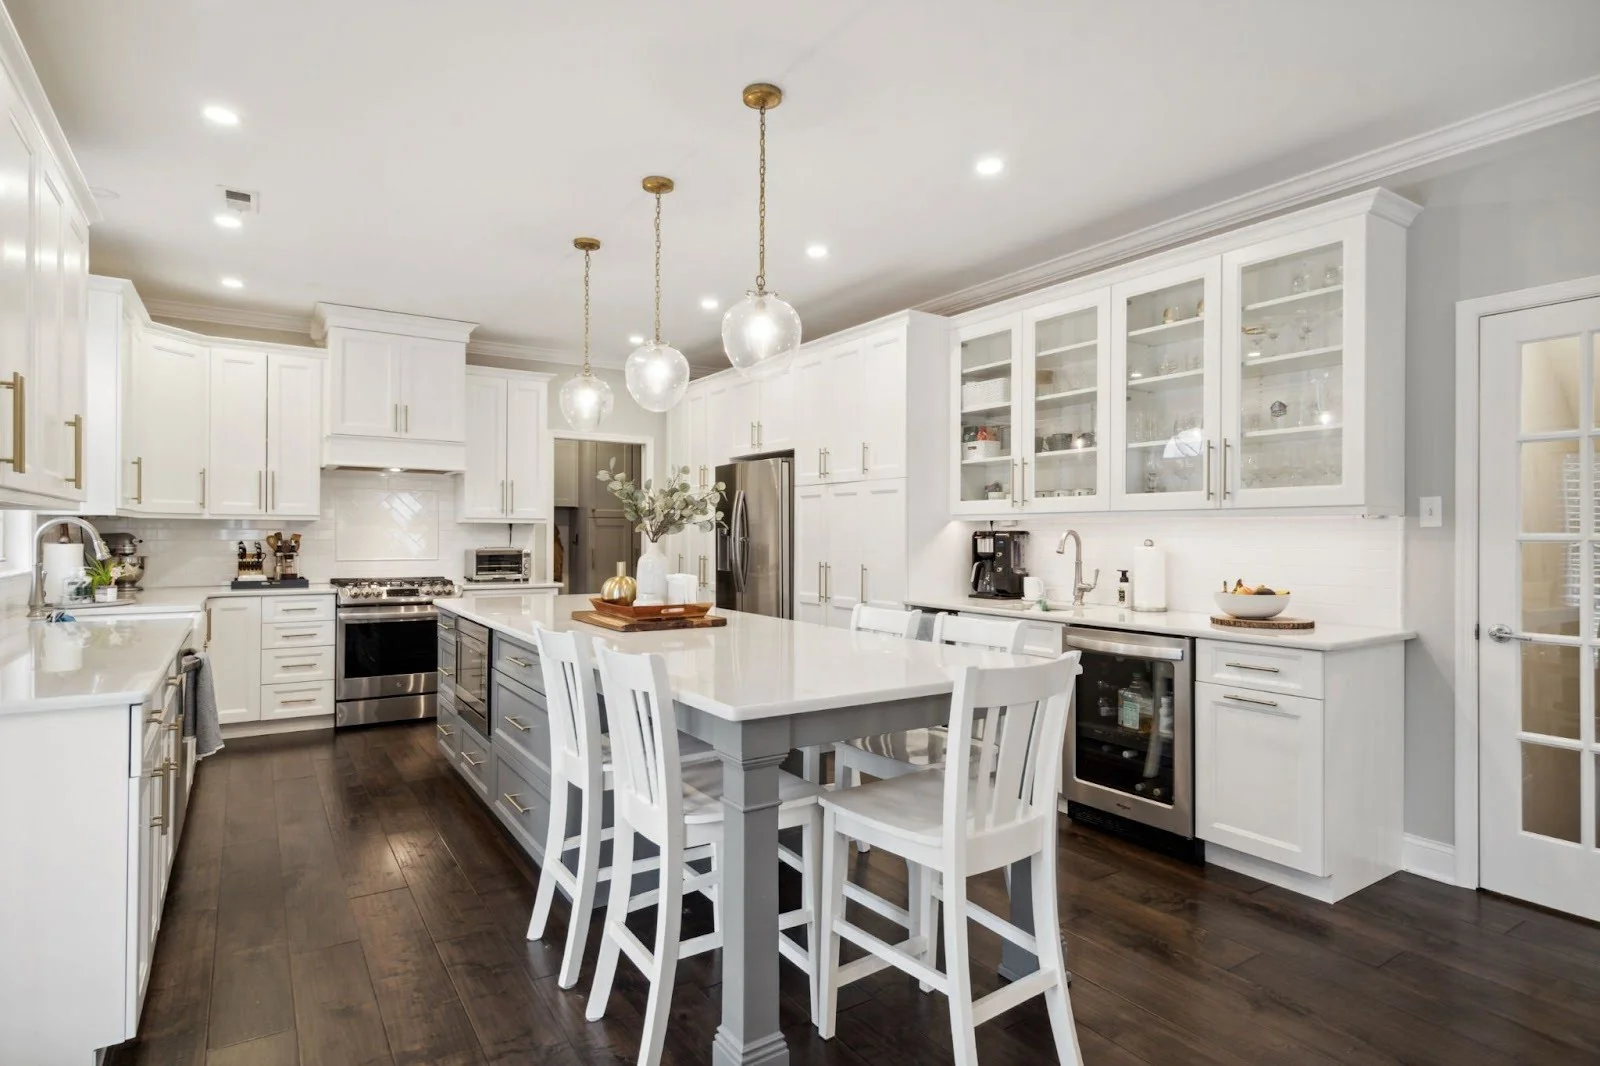 general contractors swarthmore pa, kitchen remodel swarthmore pa, we provide excellent workmanship and can offer an estimate on your new home services